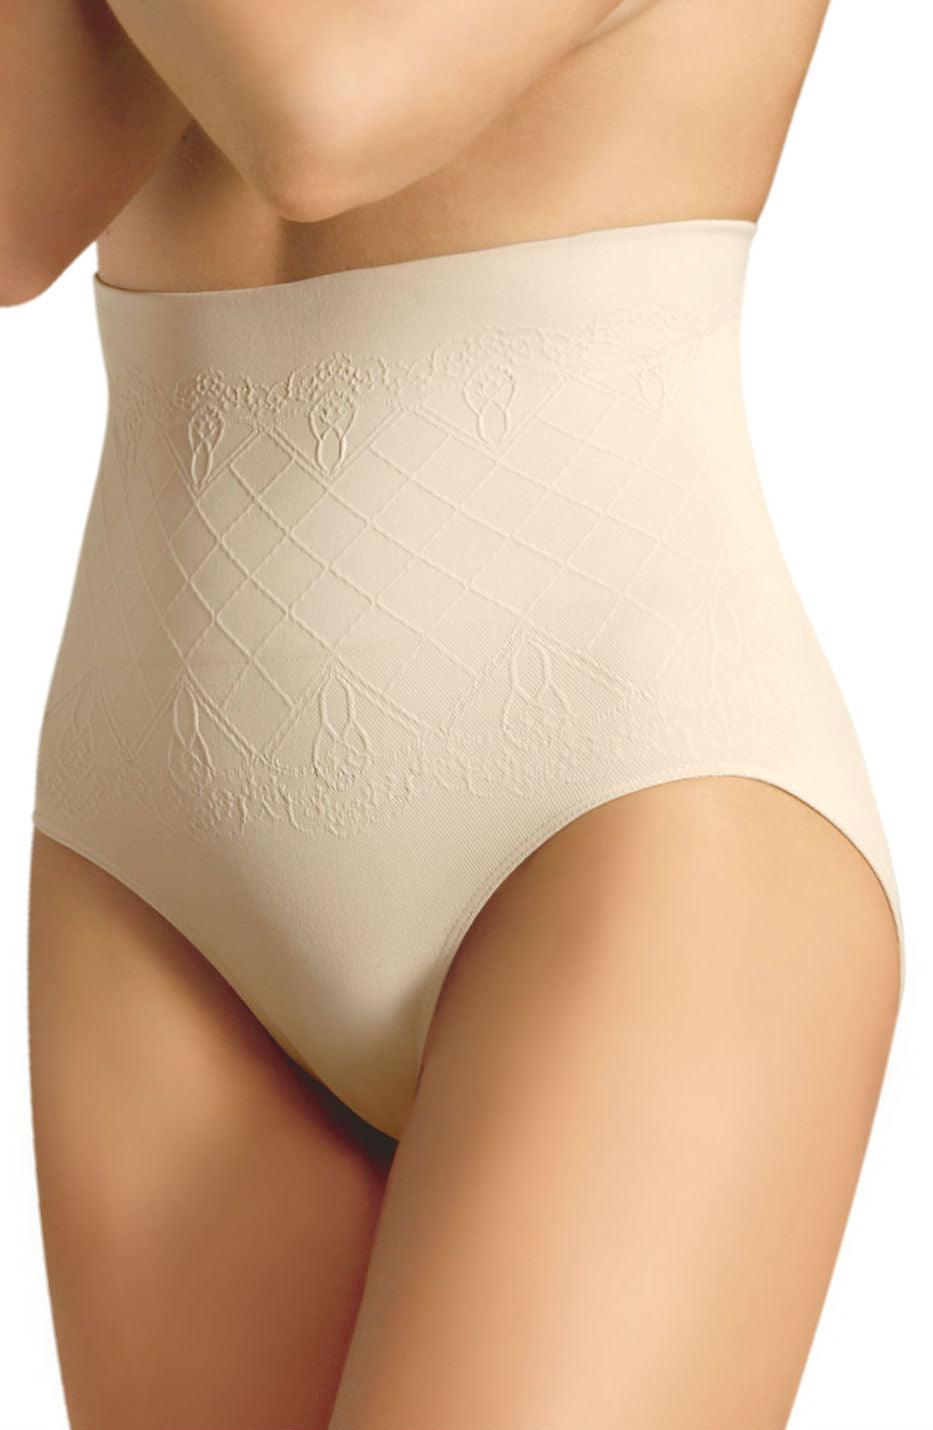 Control Body 311370S High Waist Shaping Brief Skin - Sydney Rose Lingerie 